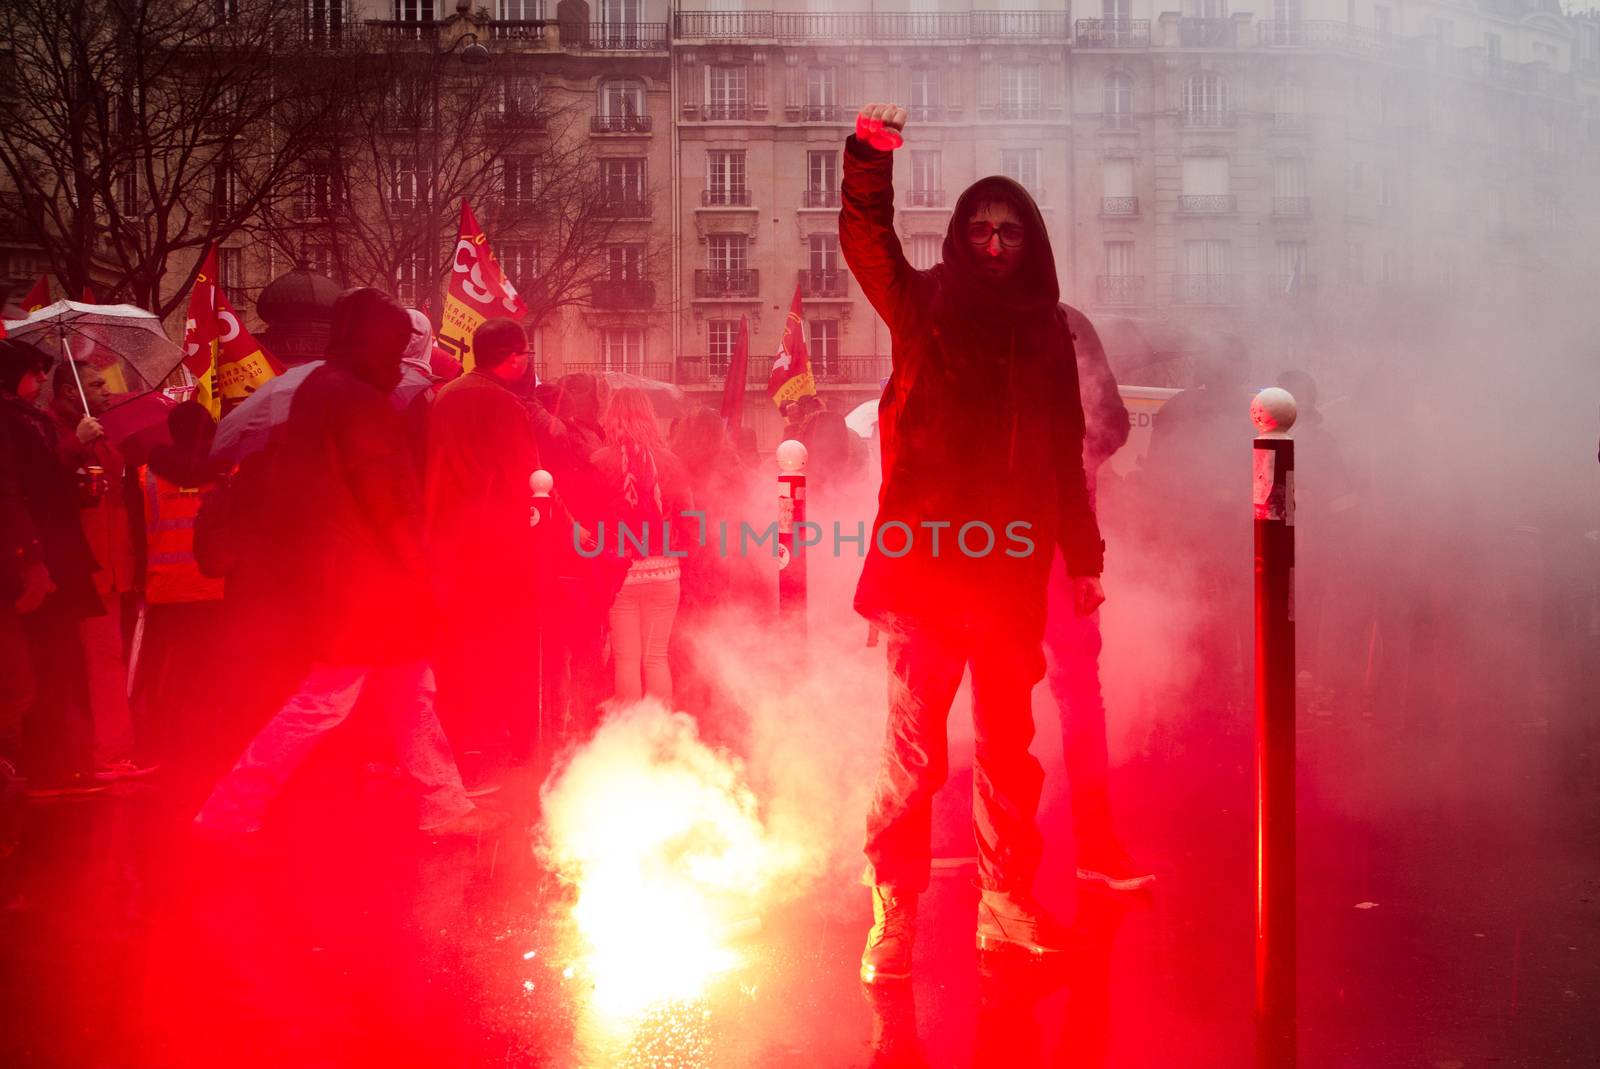 FRANCE, Paris: A protester raises his fist over a smoke bomb as thousands march against the French government's planned labor law reforms on March 31, 2016 in Paris. France faced fresh protests over labour reforms just a day after the beleaguered governme